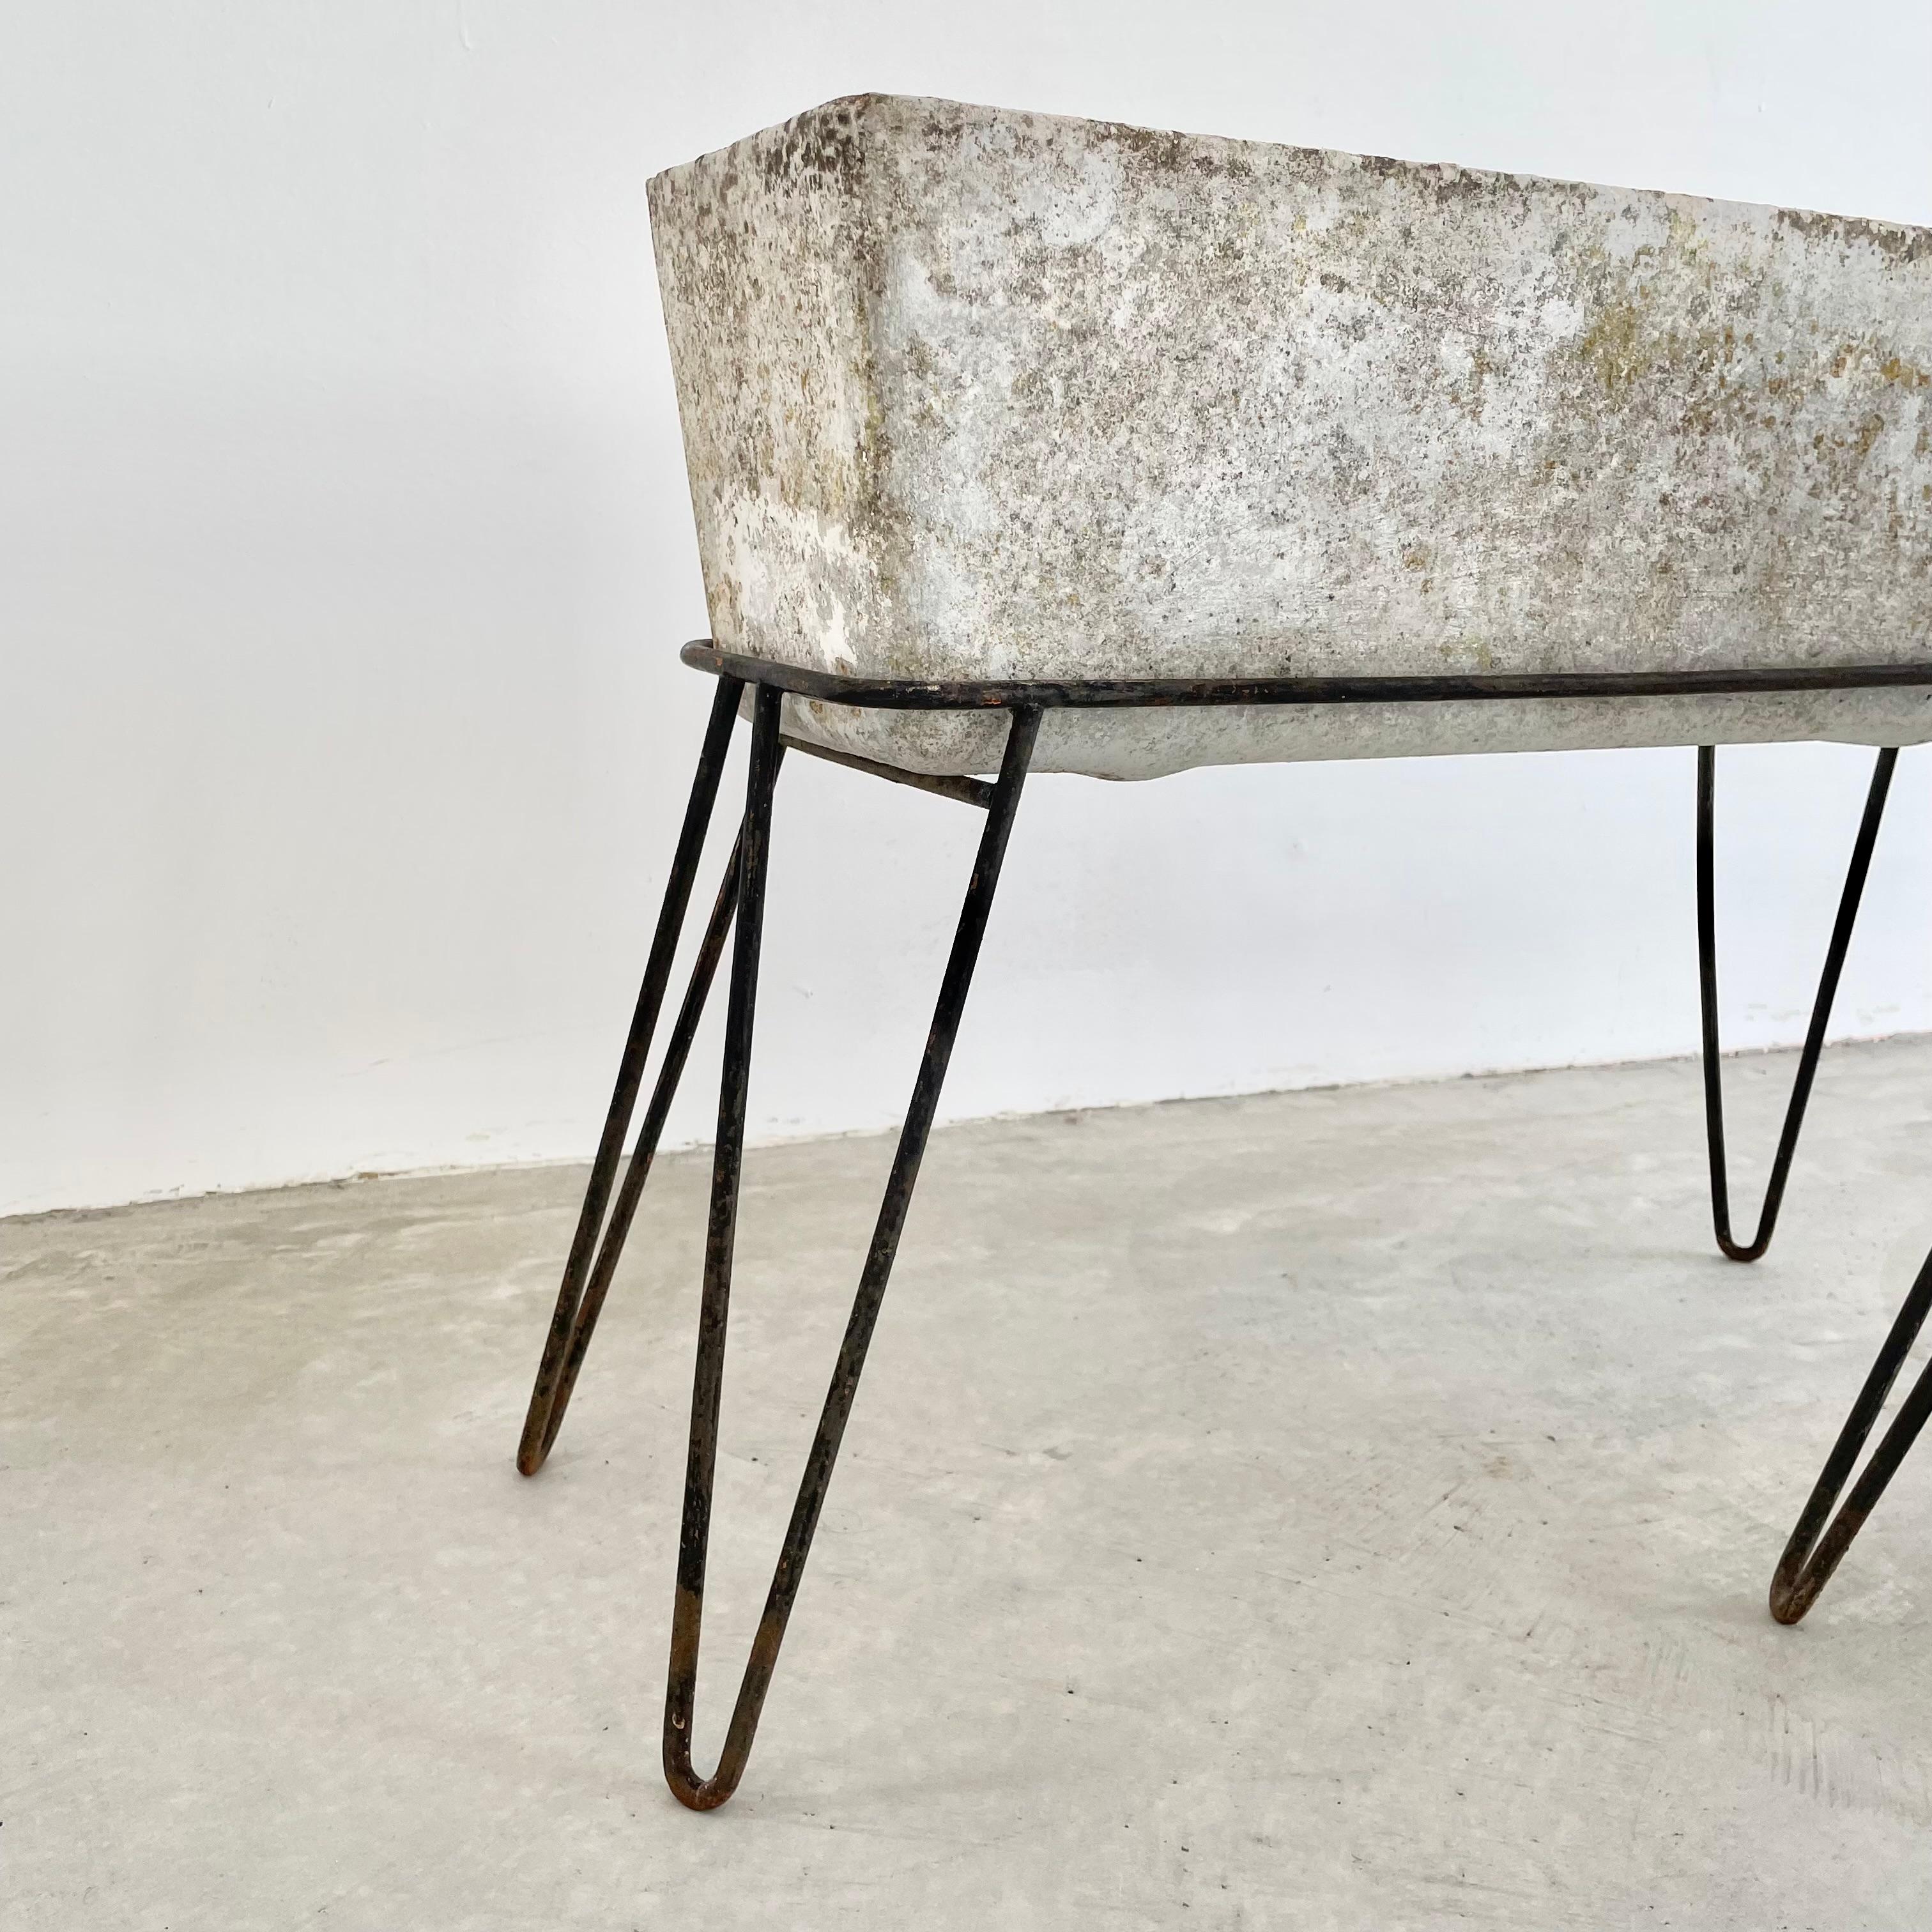 Willy Guhl Concrete Trough Planter on Iron Hairpin Stand, 1975 Switzerland For Sale 3